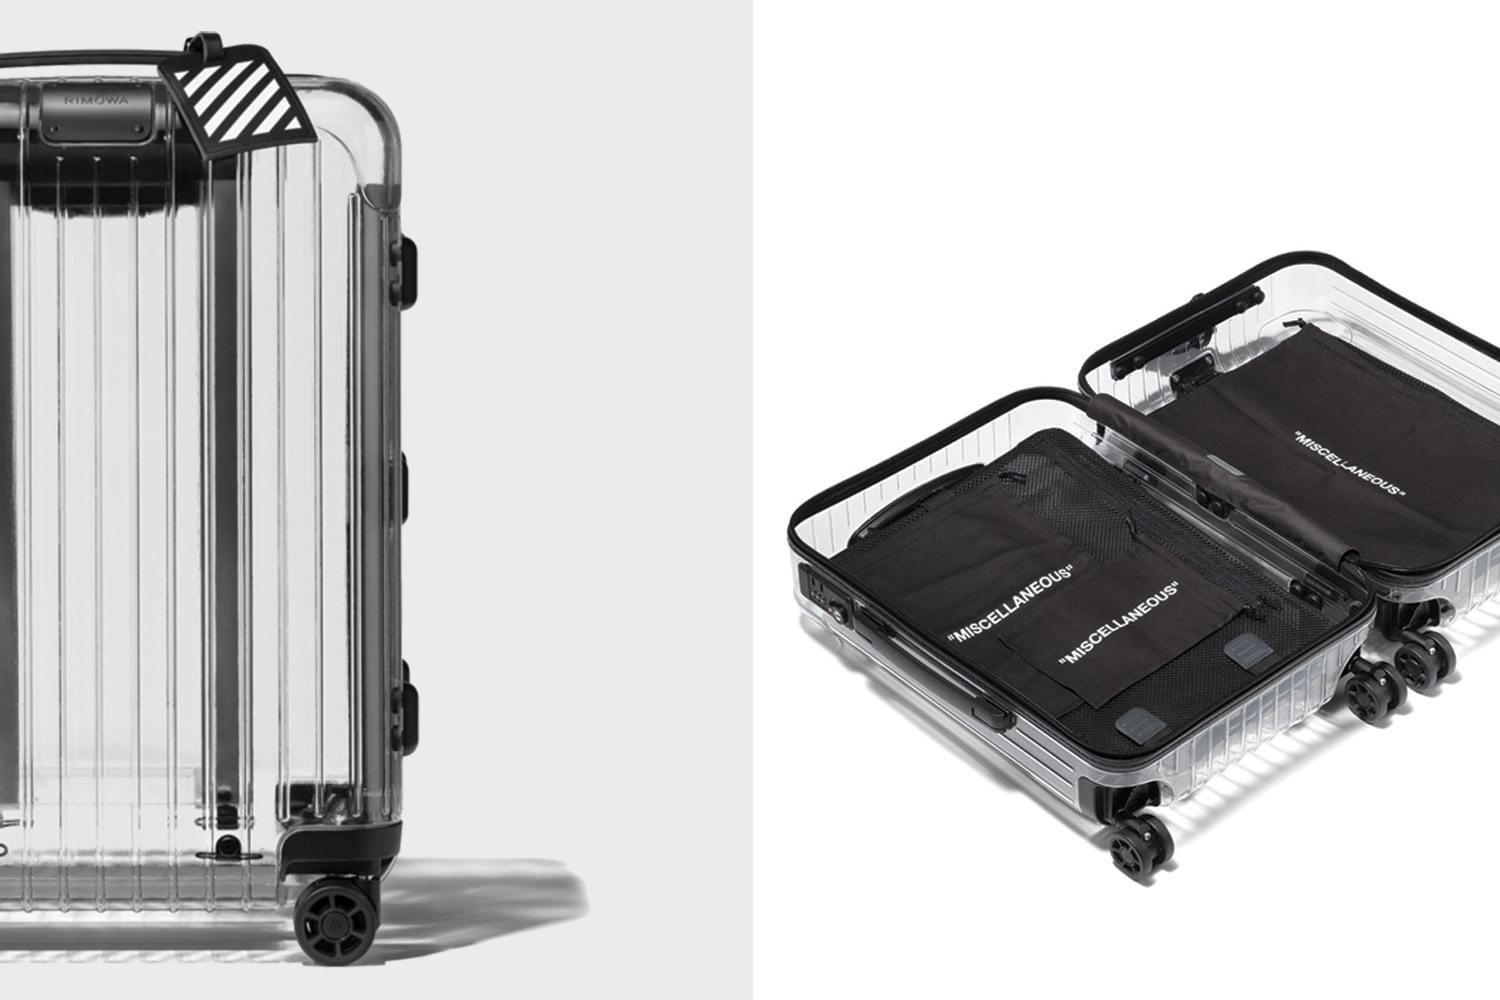 The Supreme x RIMOWA Drop Brought out London's Travel-Obsessed